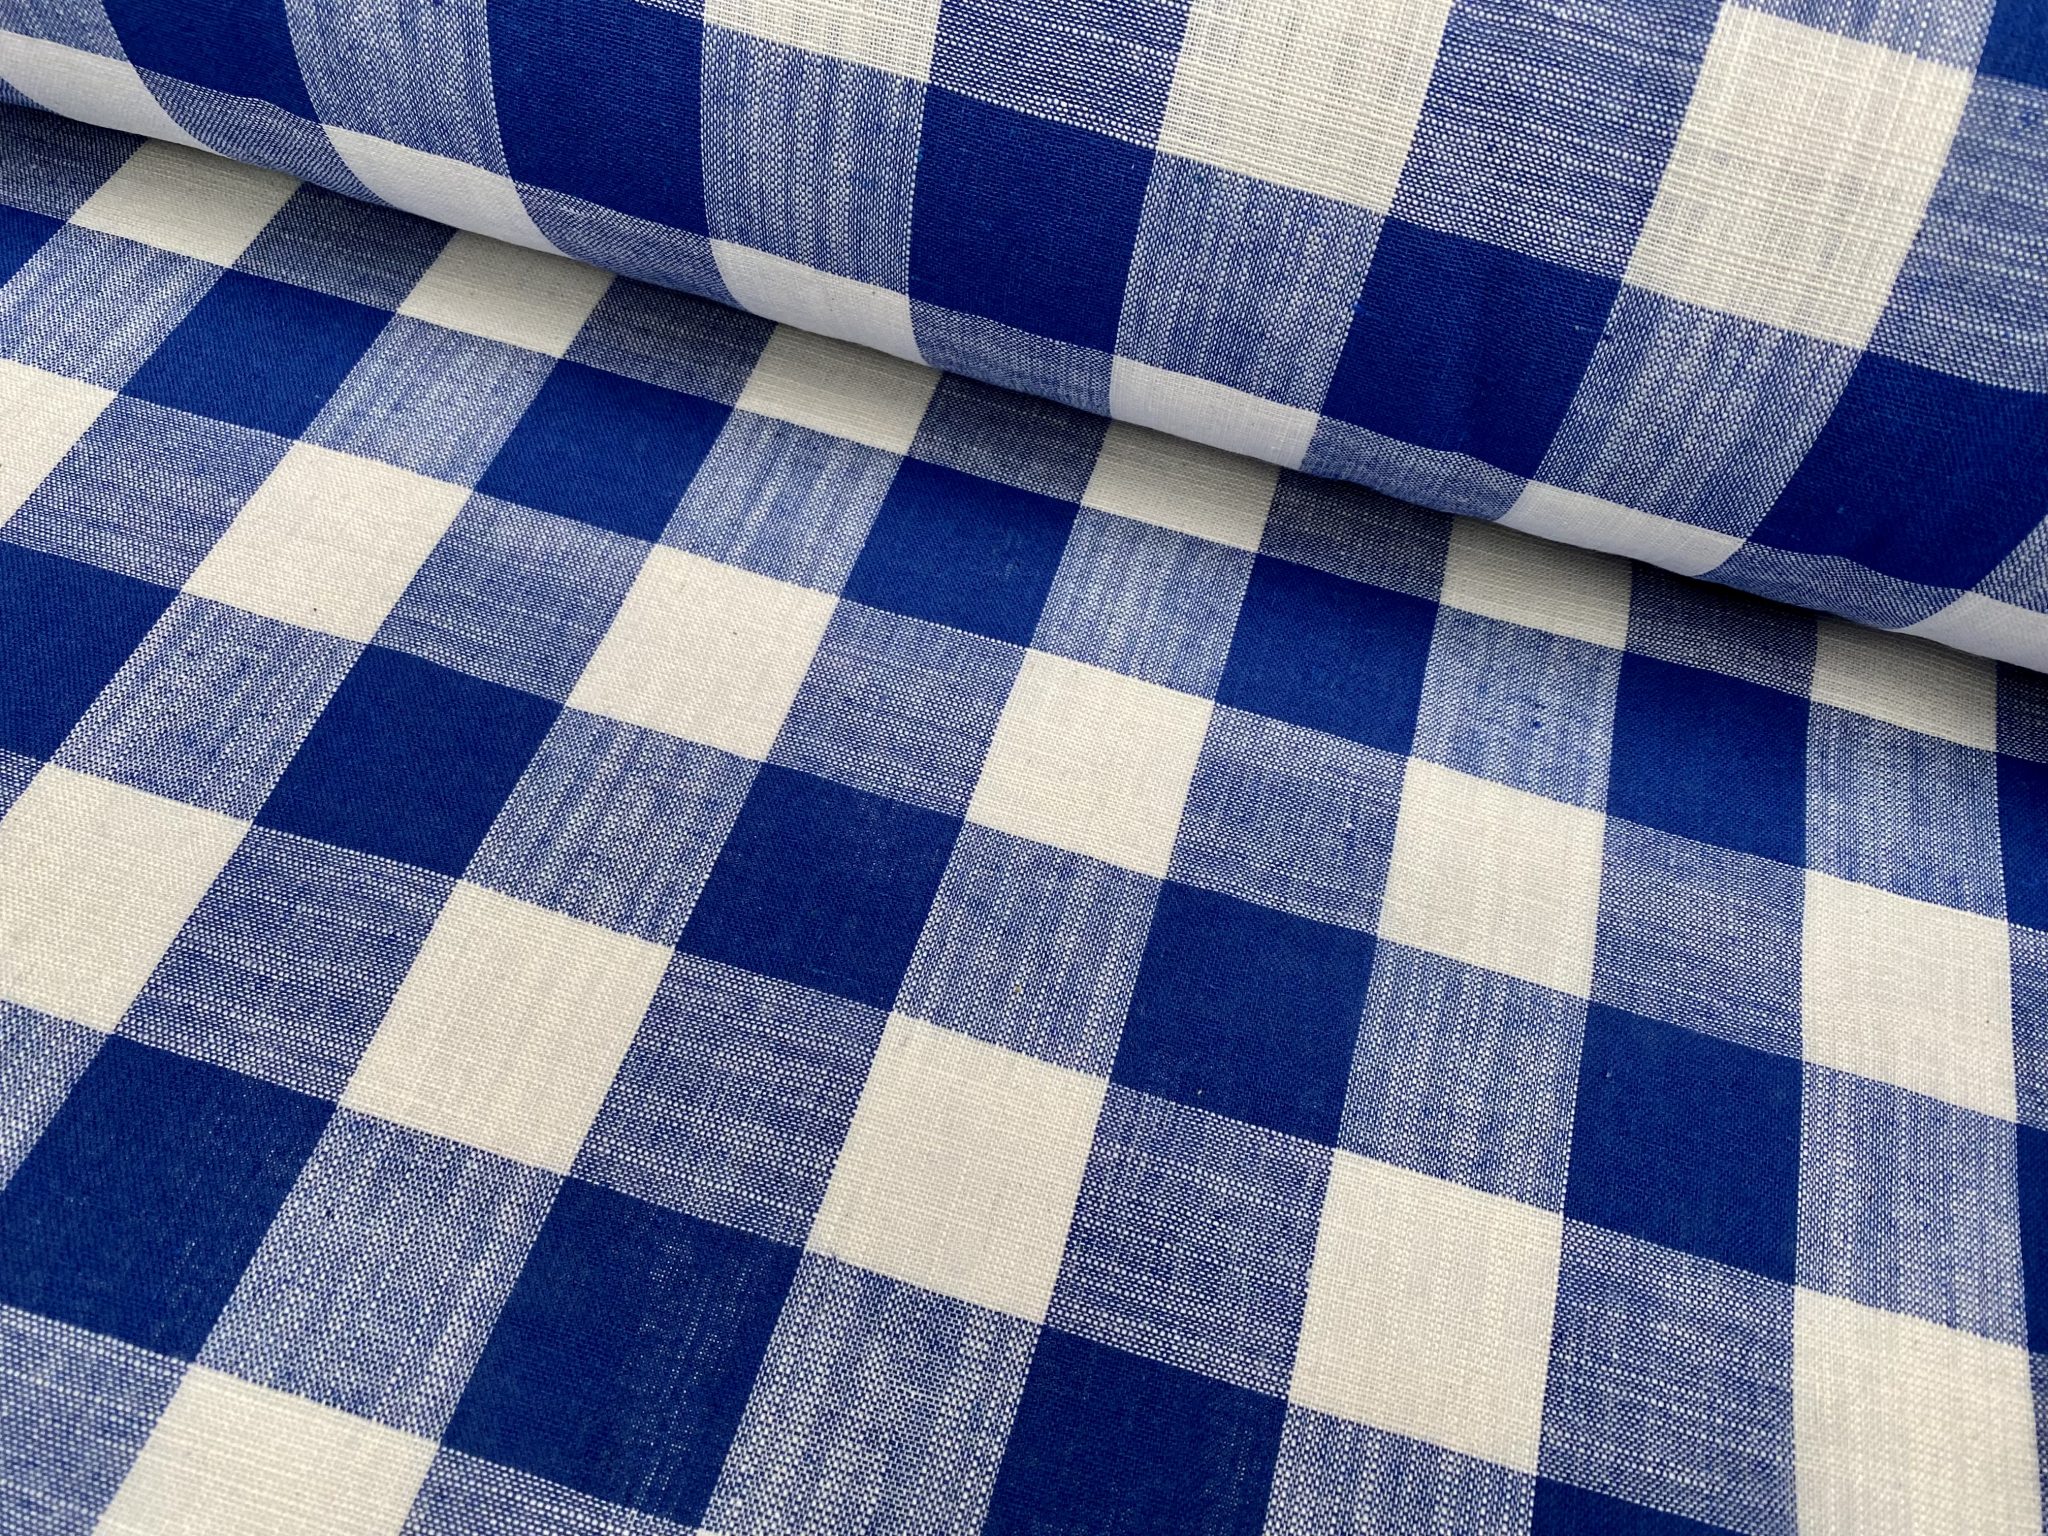 BRIGHT BLUE & White Gingham Linen Checked Linen Fabric Plaid Material ...